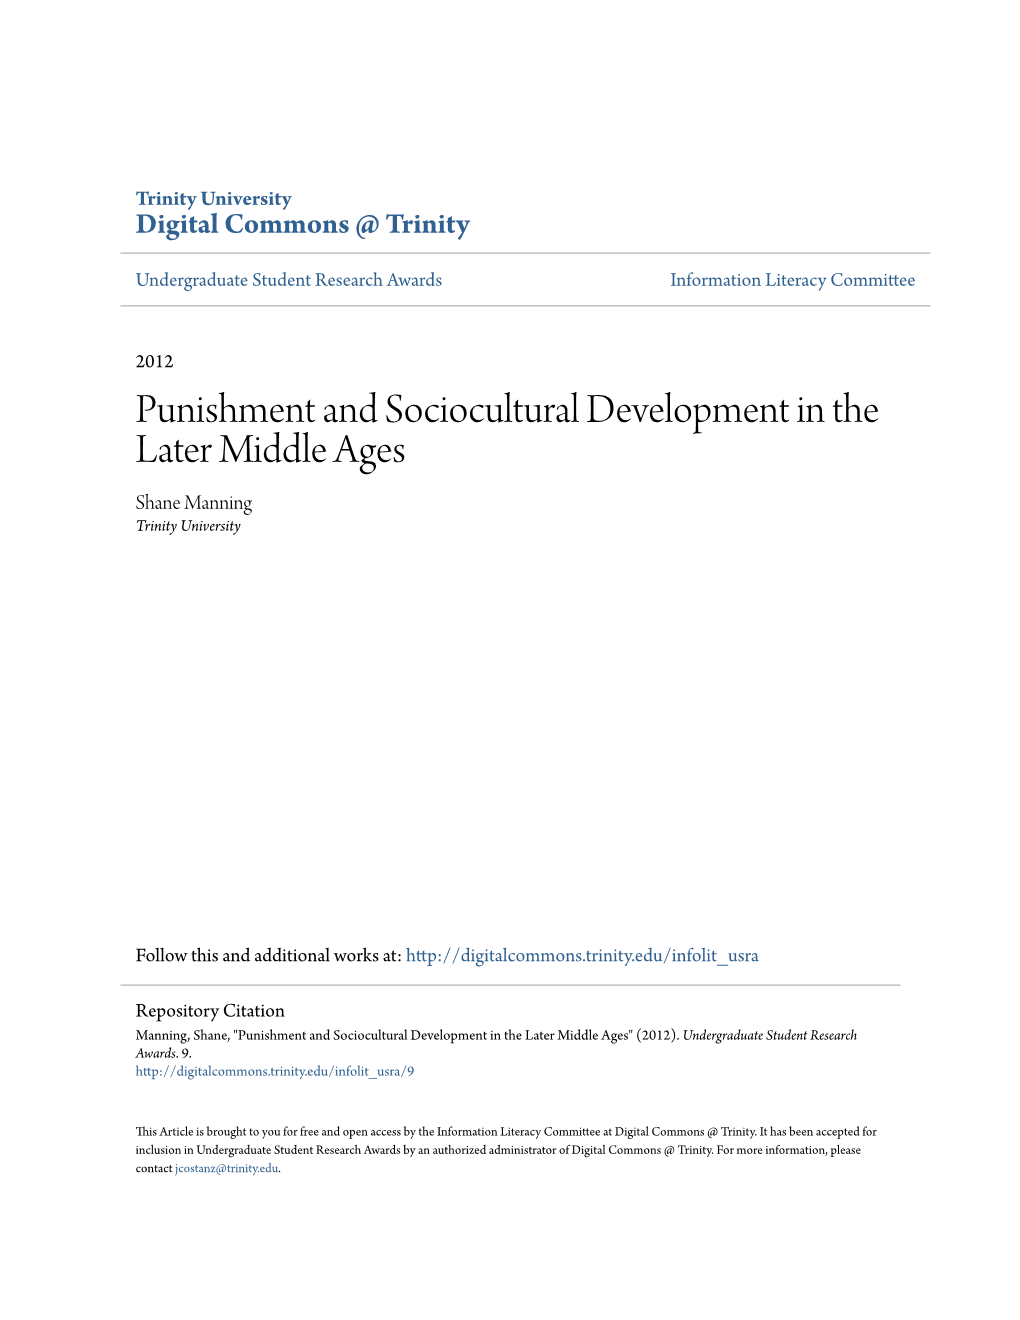 Punishment and Sociocultural Development in the Later Middle Ages Shane Manning Trinity University